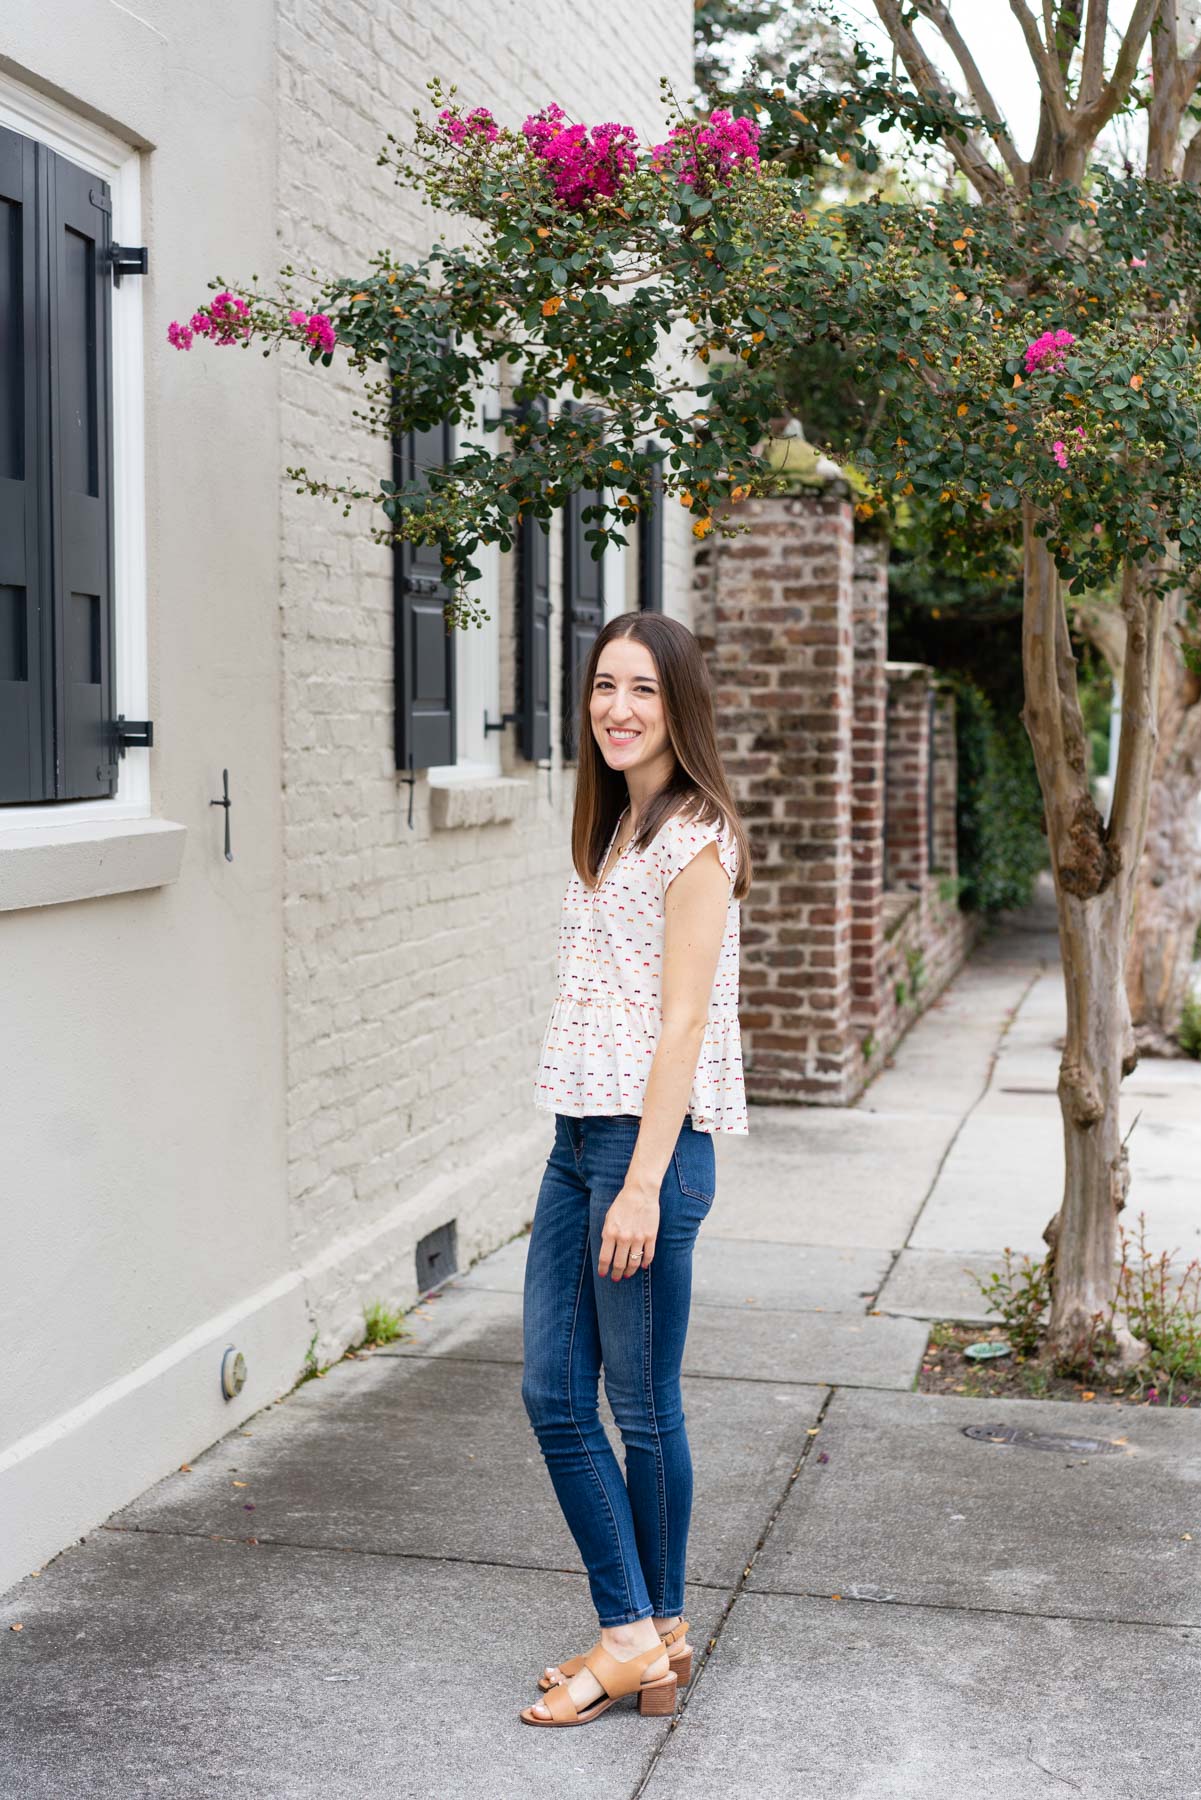 Woman in denim jeans and a white blouse standing on the sidewalk demonstrating how not to pose for a photoshoot